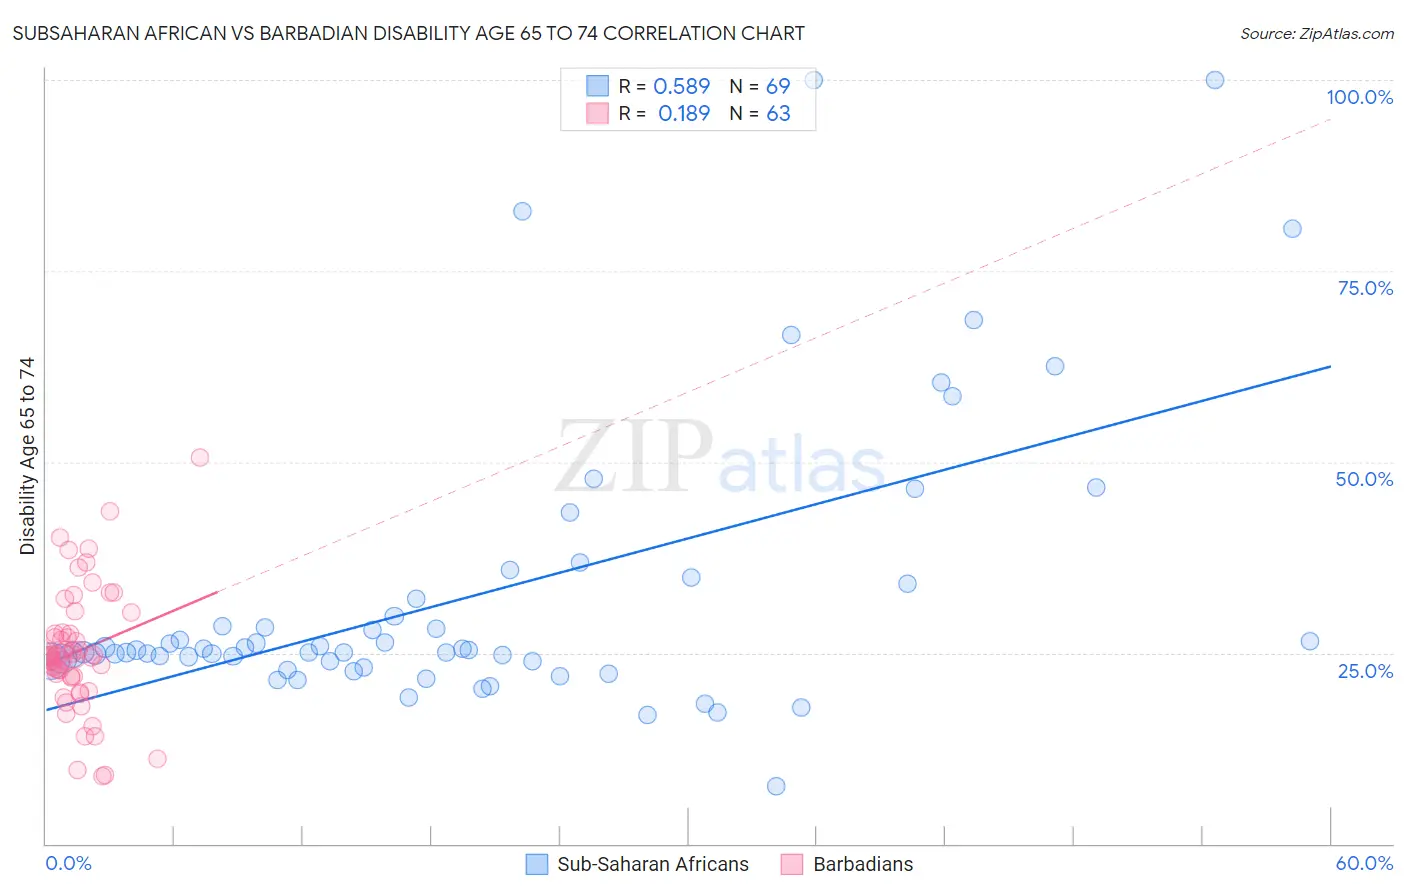 Subsaharan African vs Barbadian Disability Age 65 to 74